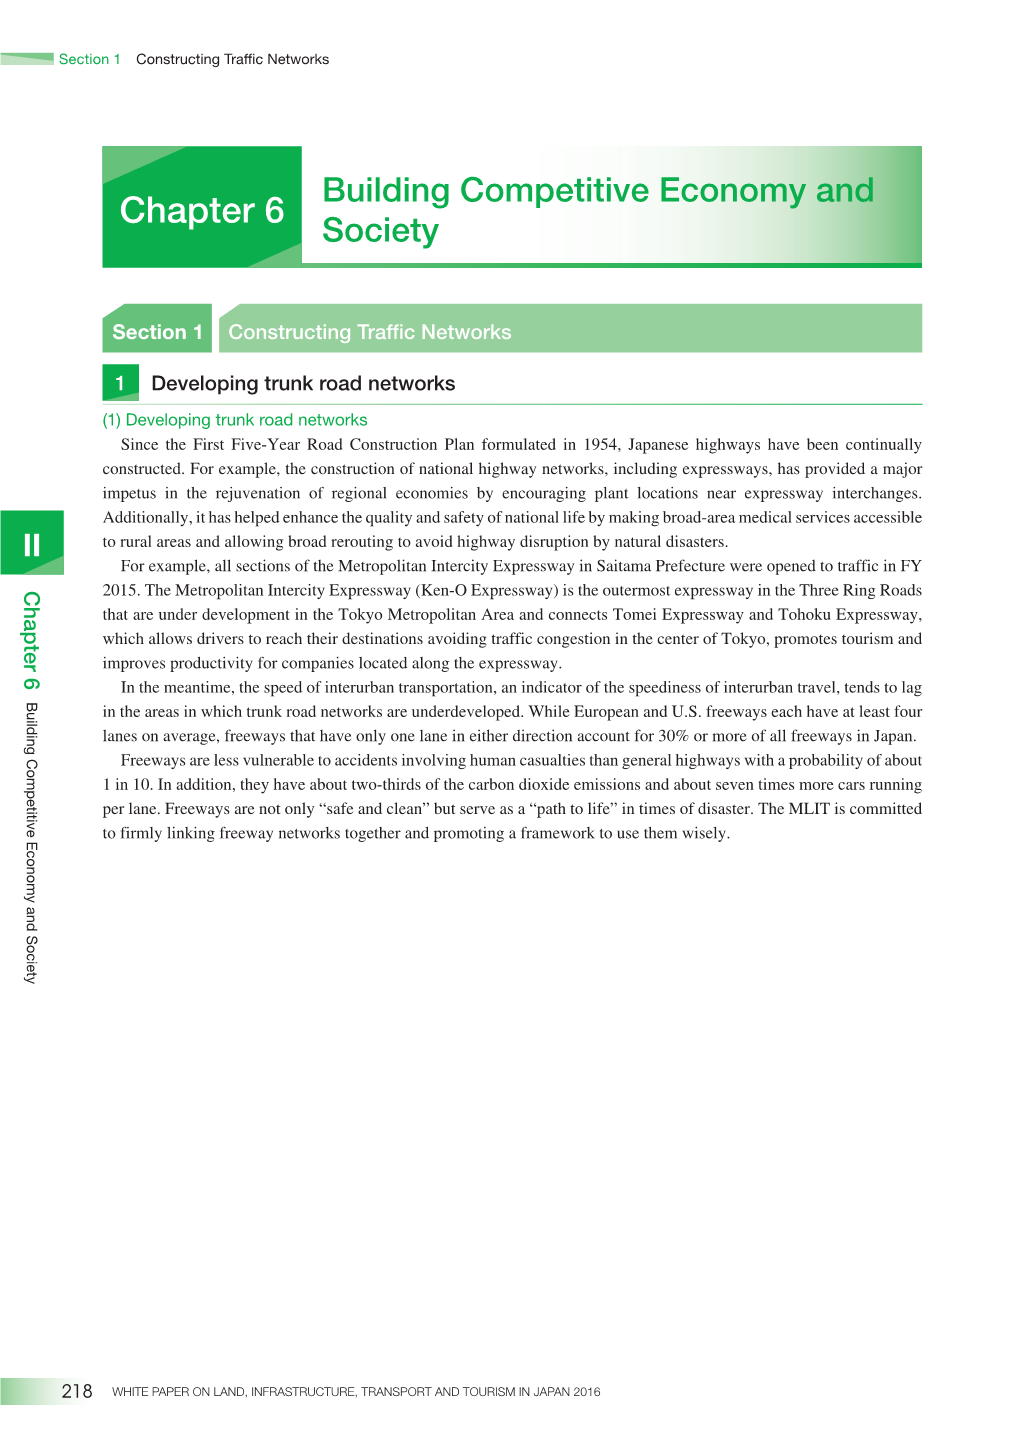 Chapter 6. Building Competitive Economy and Society